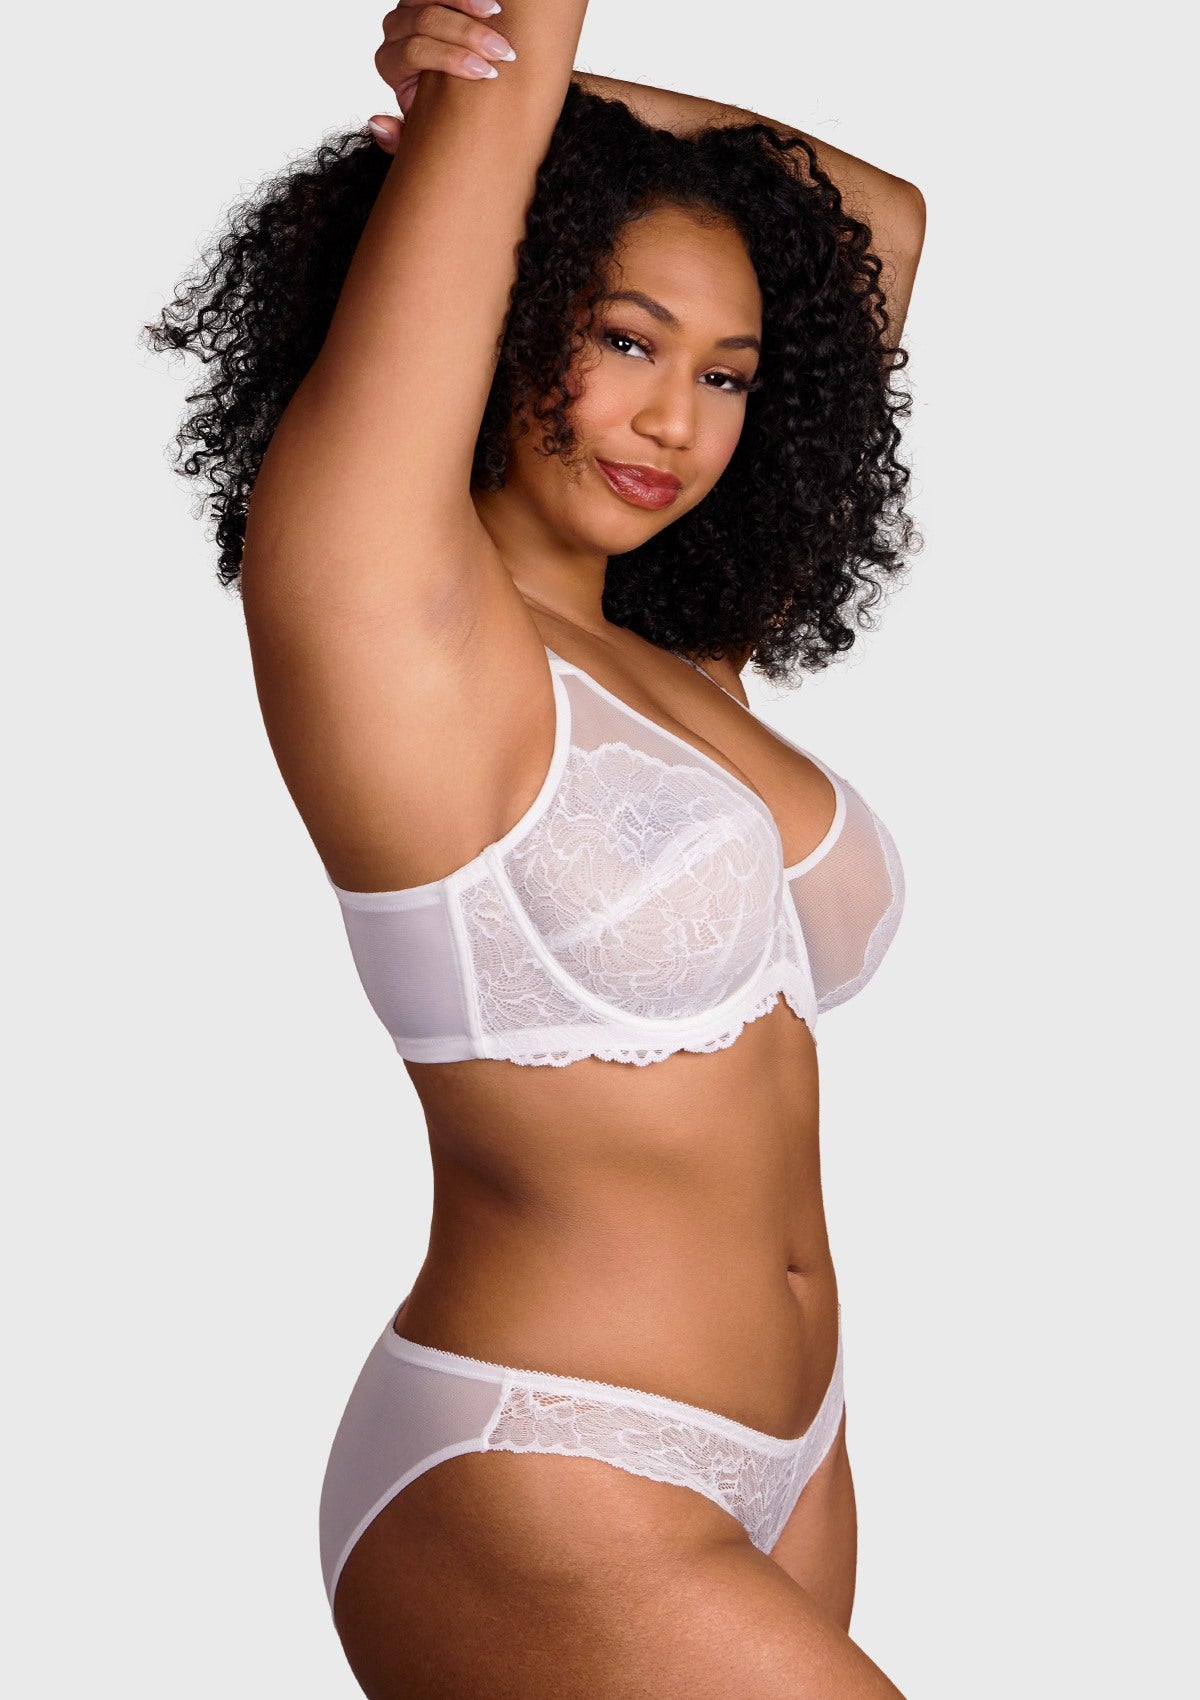 HSIA Blossom Bestseller Unlined Underwire Lace Bra - White / 44 / DDD/F